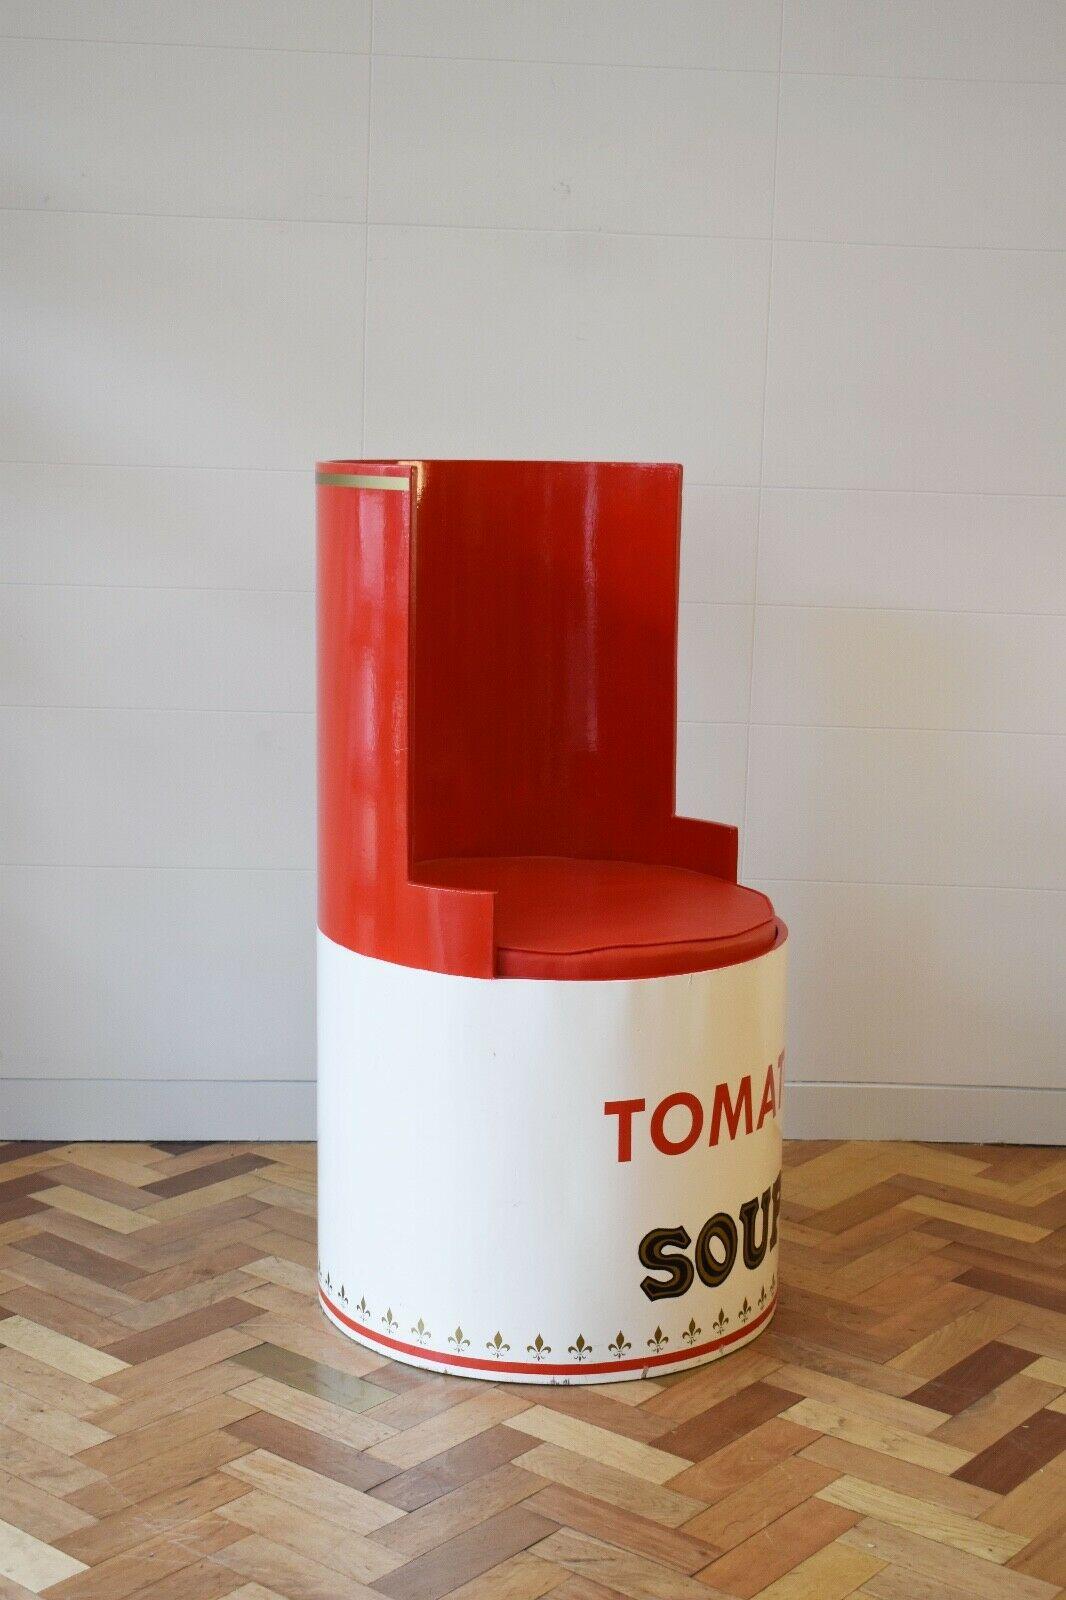 Rare vintage Campbell soup chair, attributed to Andy Warhol's iconic Pop Art design which appropriated familar images from mass consumer culture. 

An interesting and rare decorative piece that pays homage to one of the leading artist figures